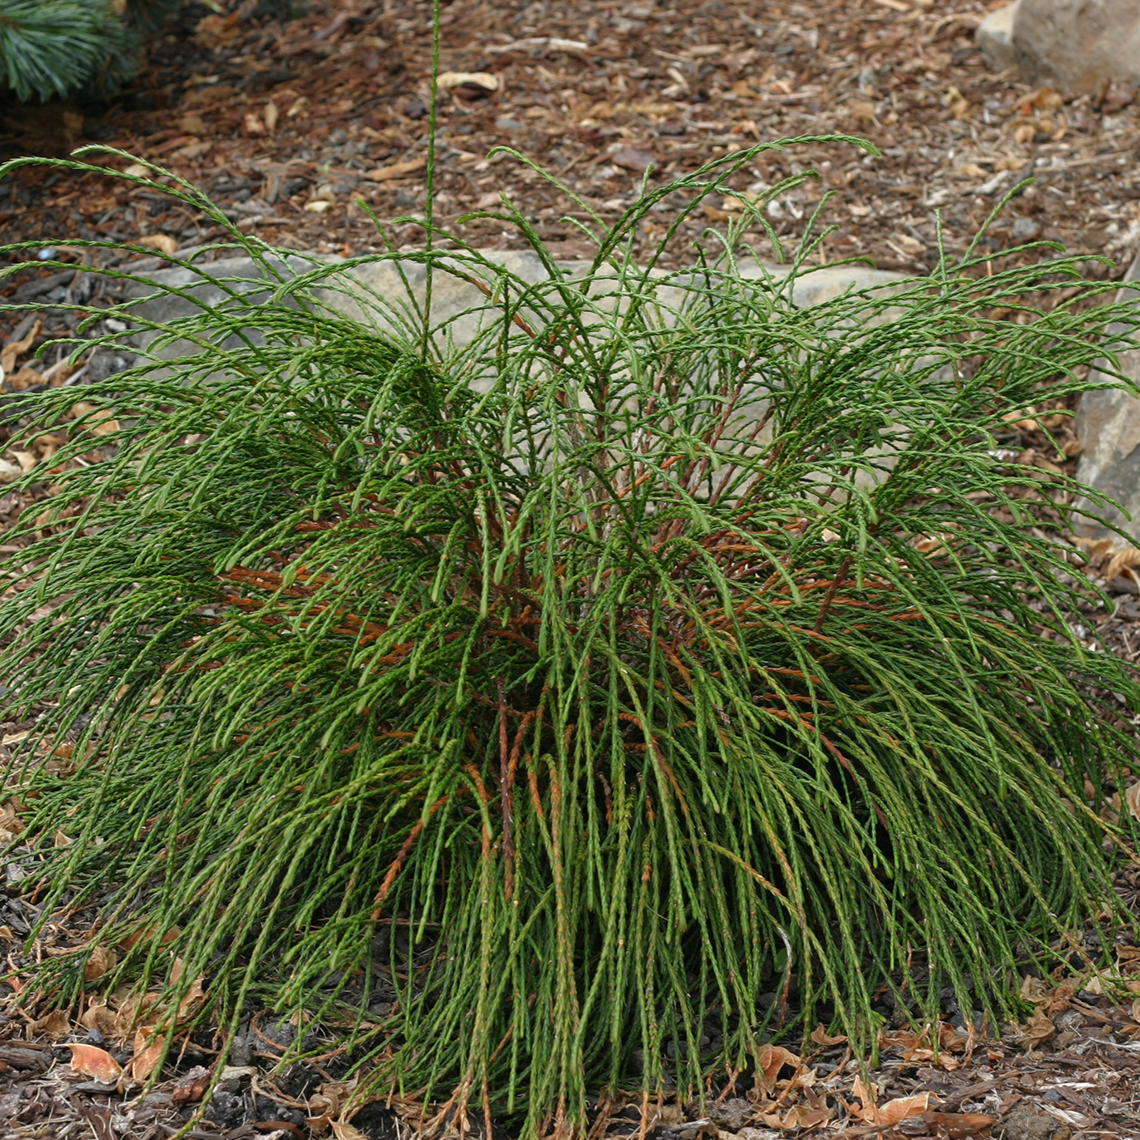 Whipcord Western arborvitae planted in front of a rock showing its unique cord like stems